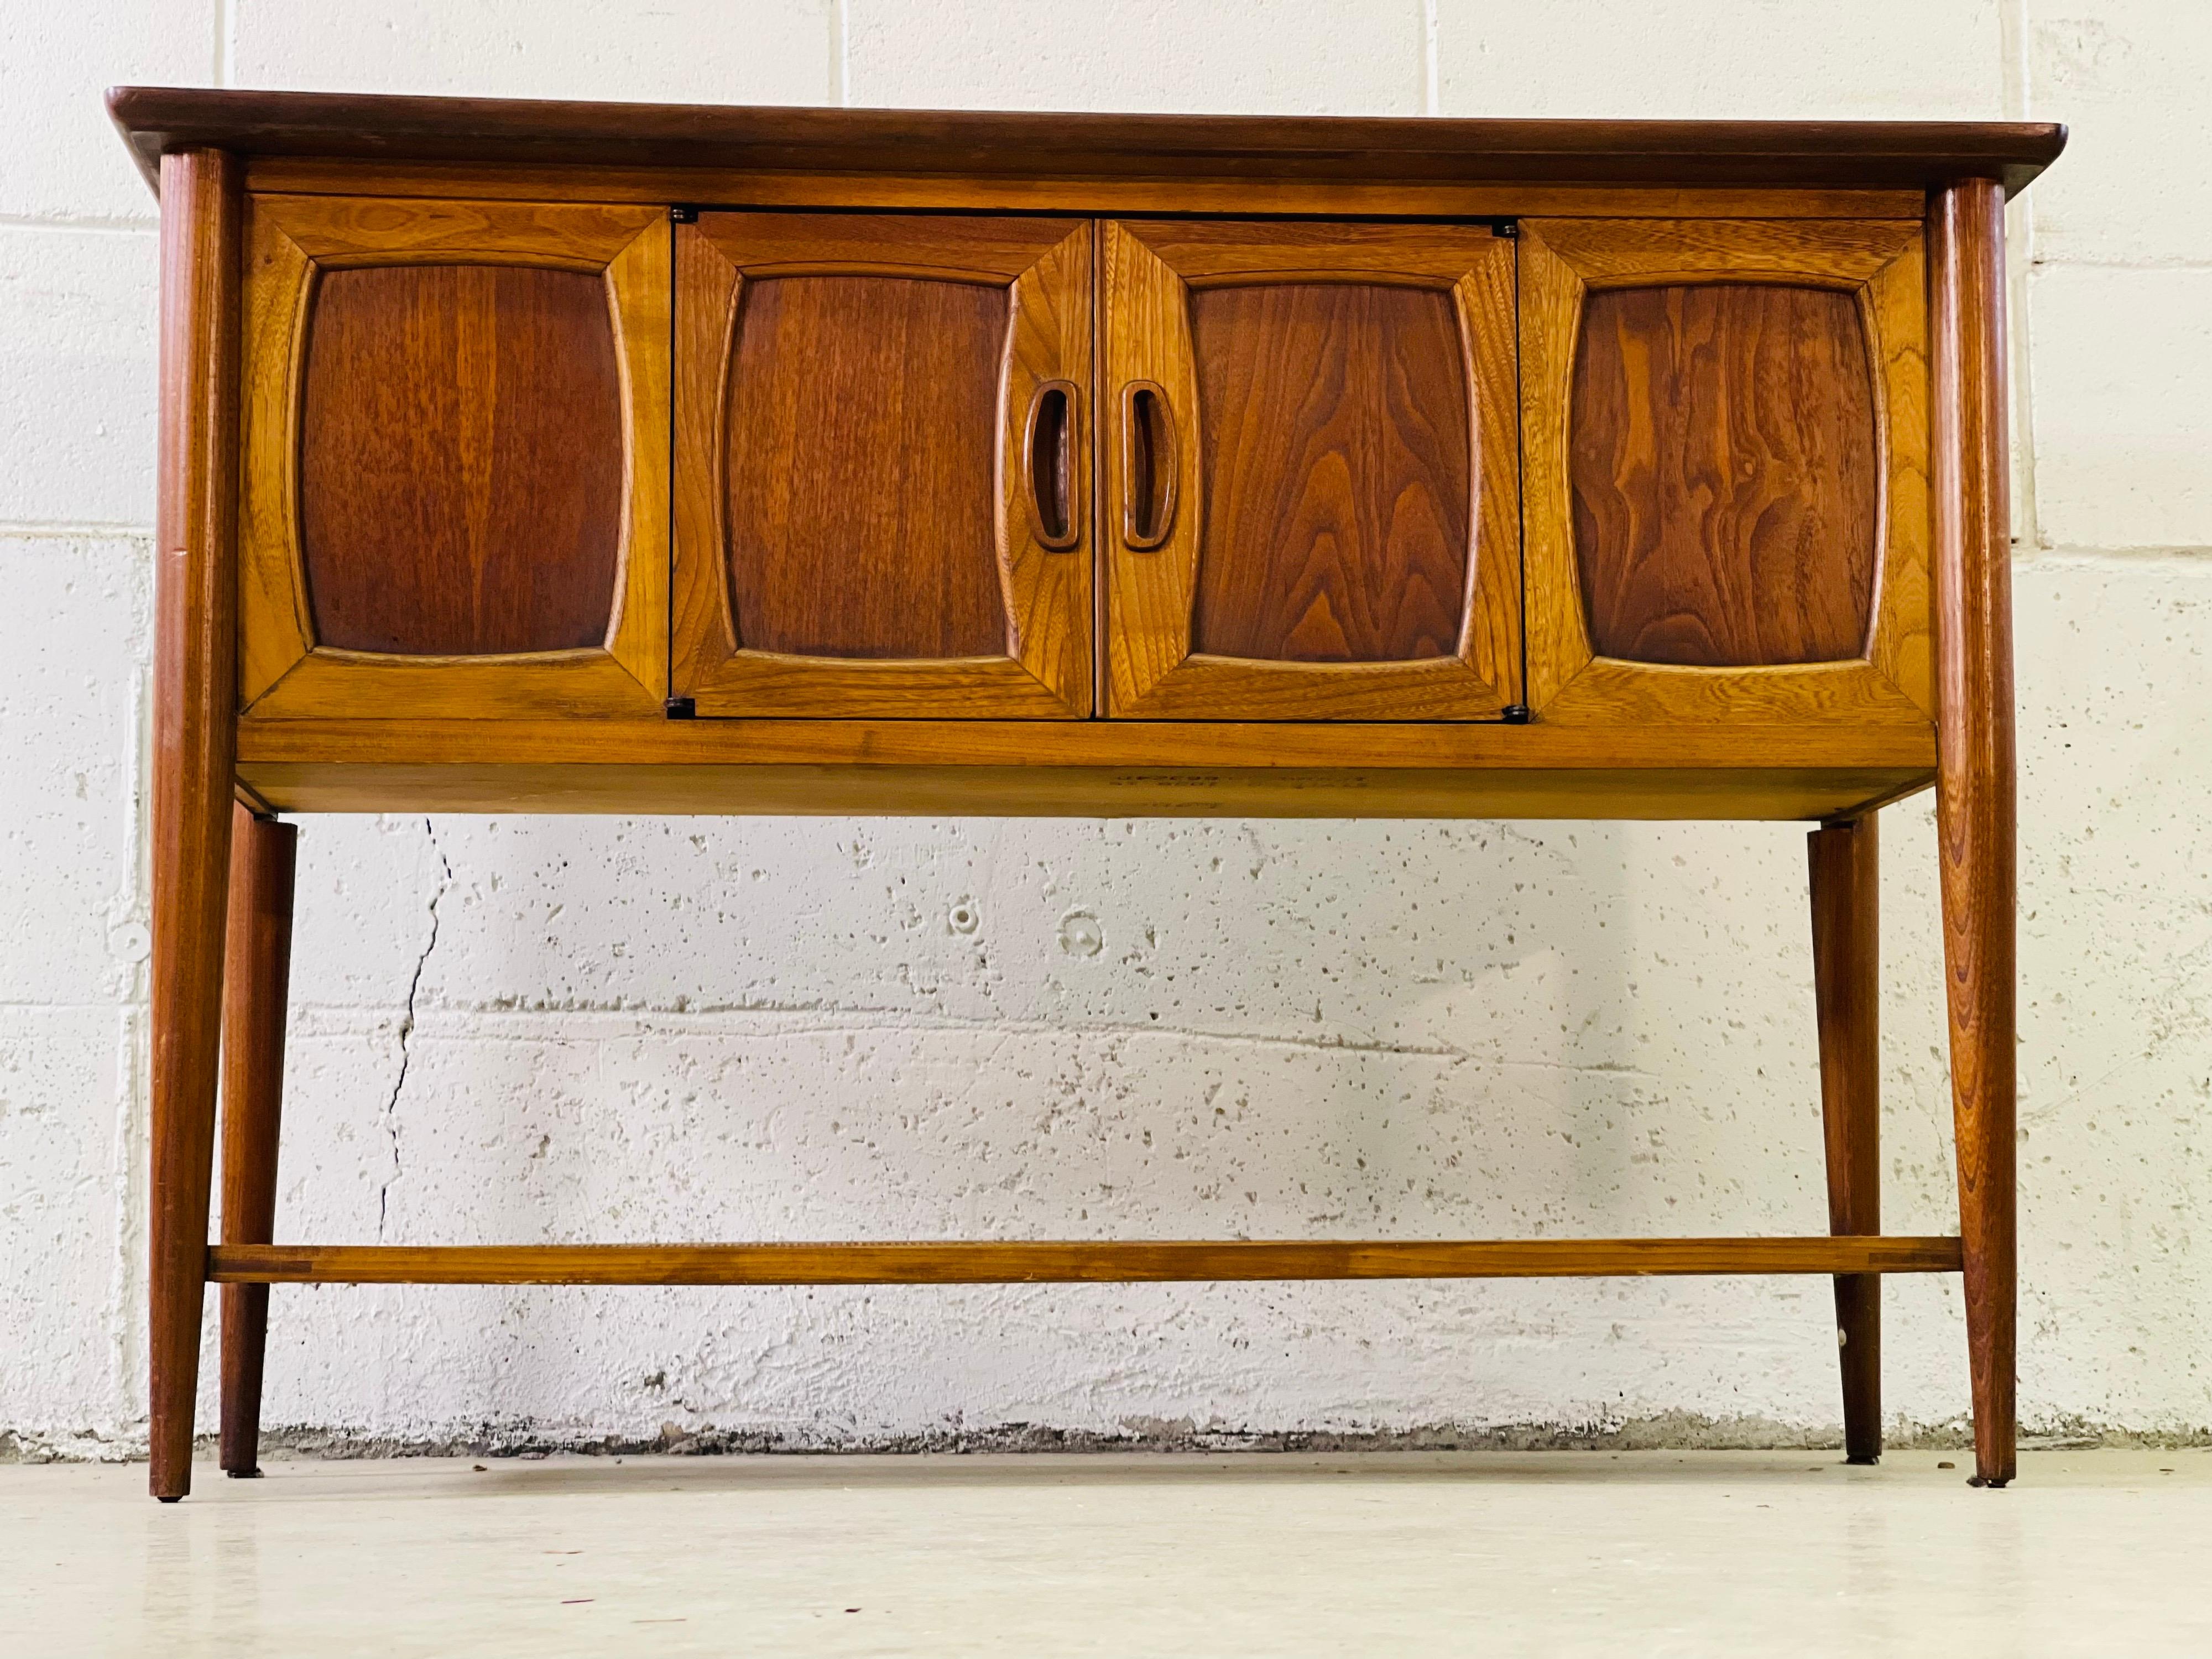 1960s walnut console table by Lane Furniture Company. The table has two doors in the front for open storage inside and a rattan shelf on the bottom. The top of the table is faux wood laminate. Marked underneath.